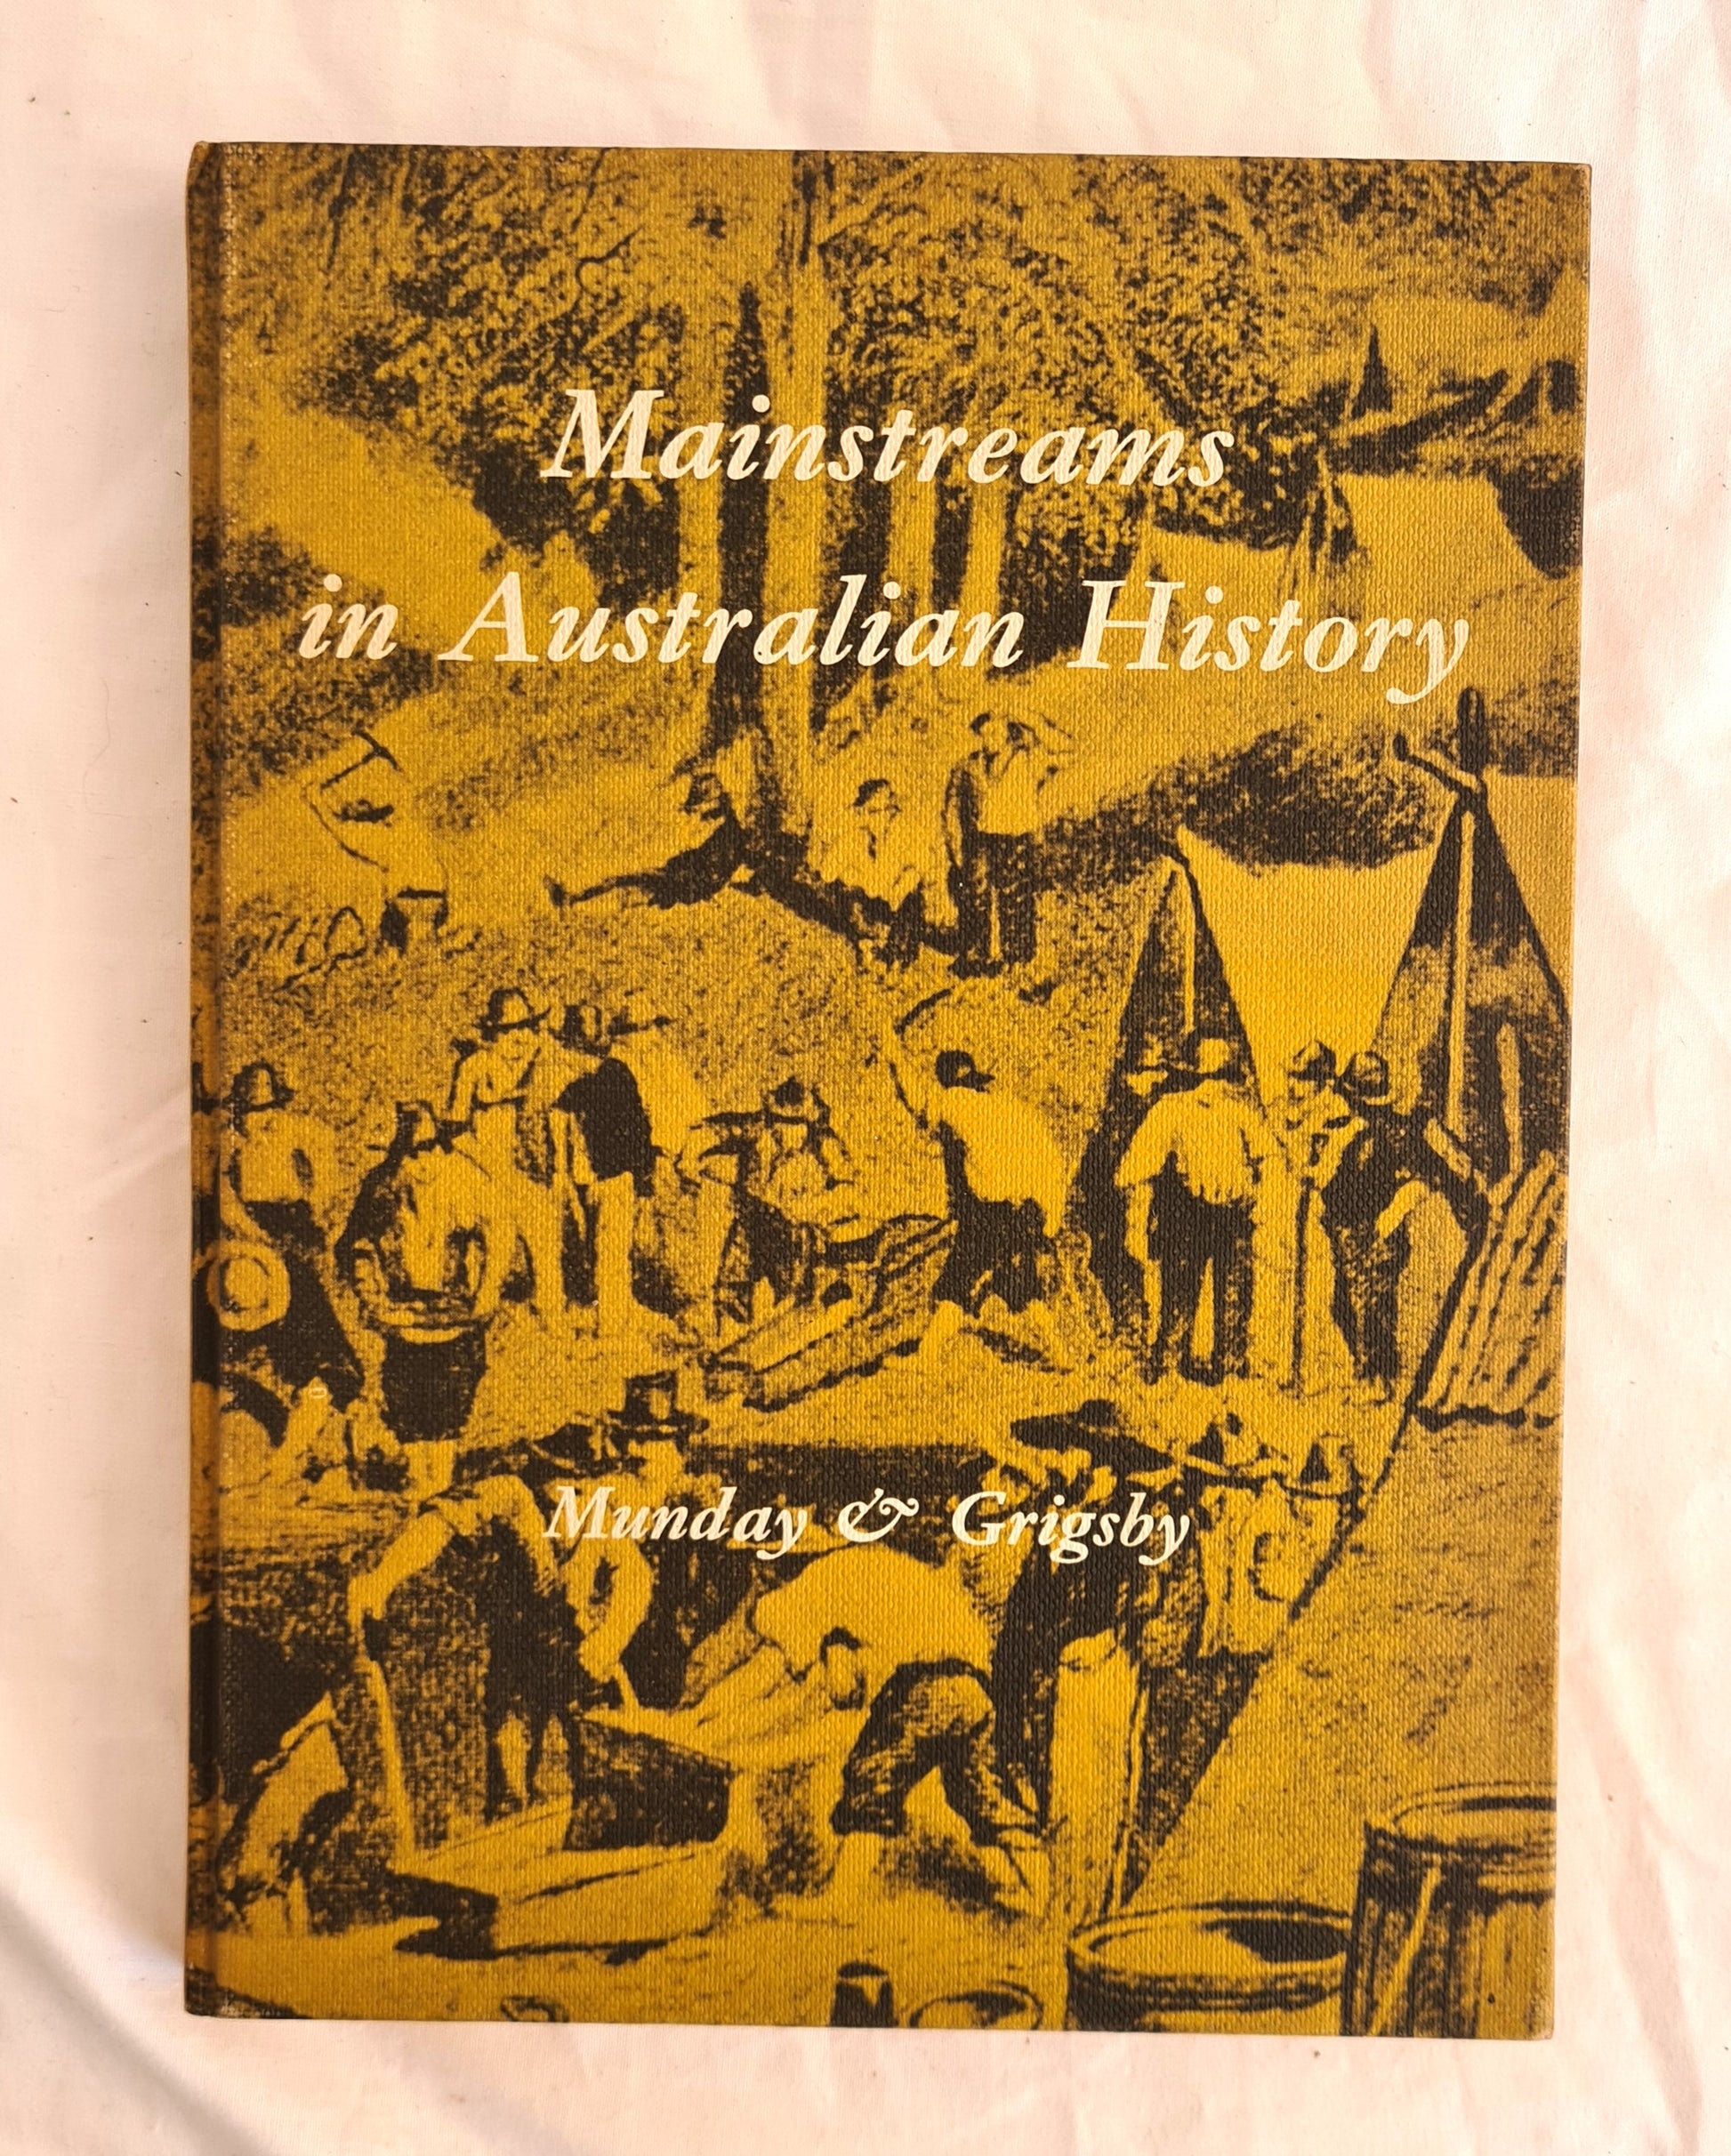 Mainstreams in Australian History  by B. J. Munday and J. R. Grigsby  Line Drawings by C. Green